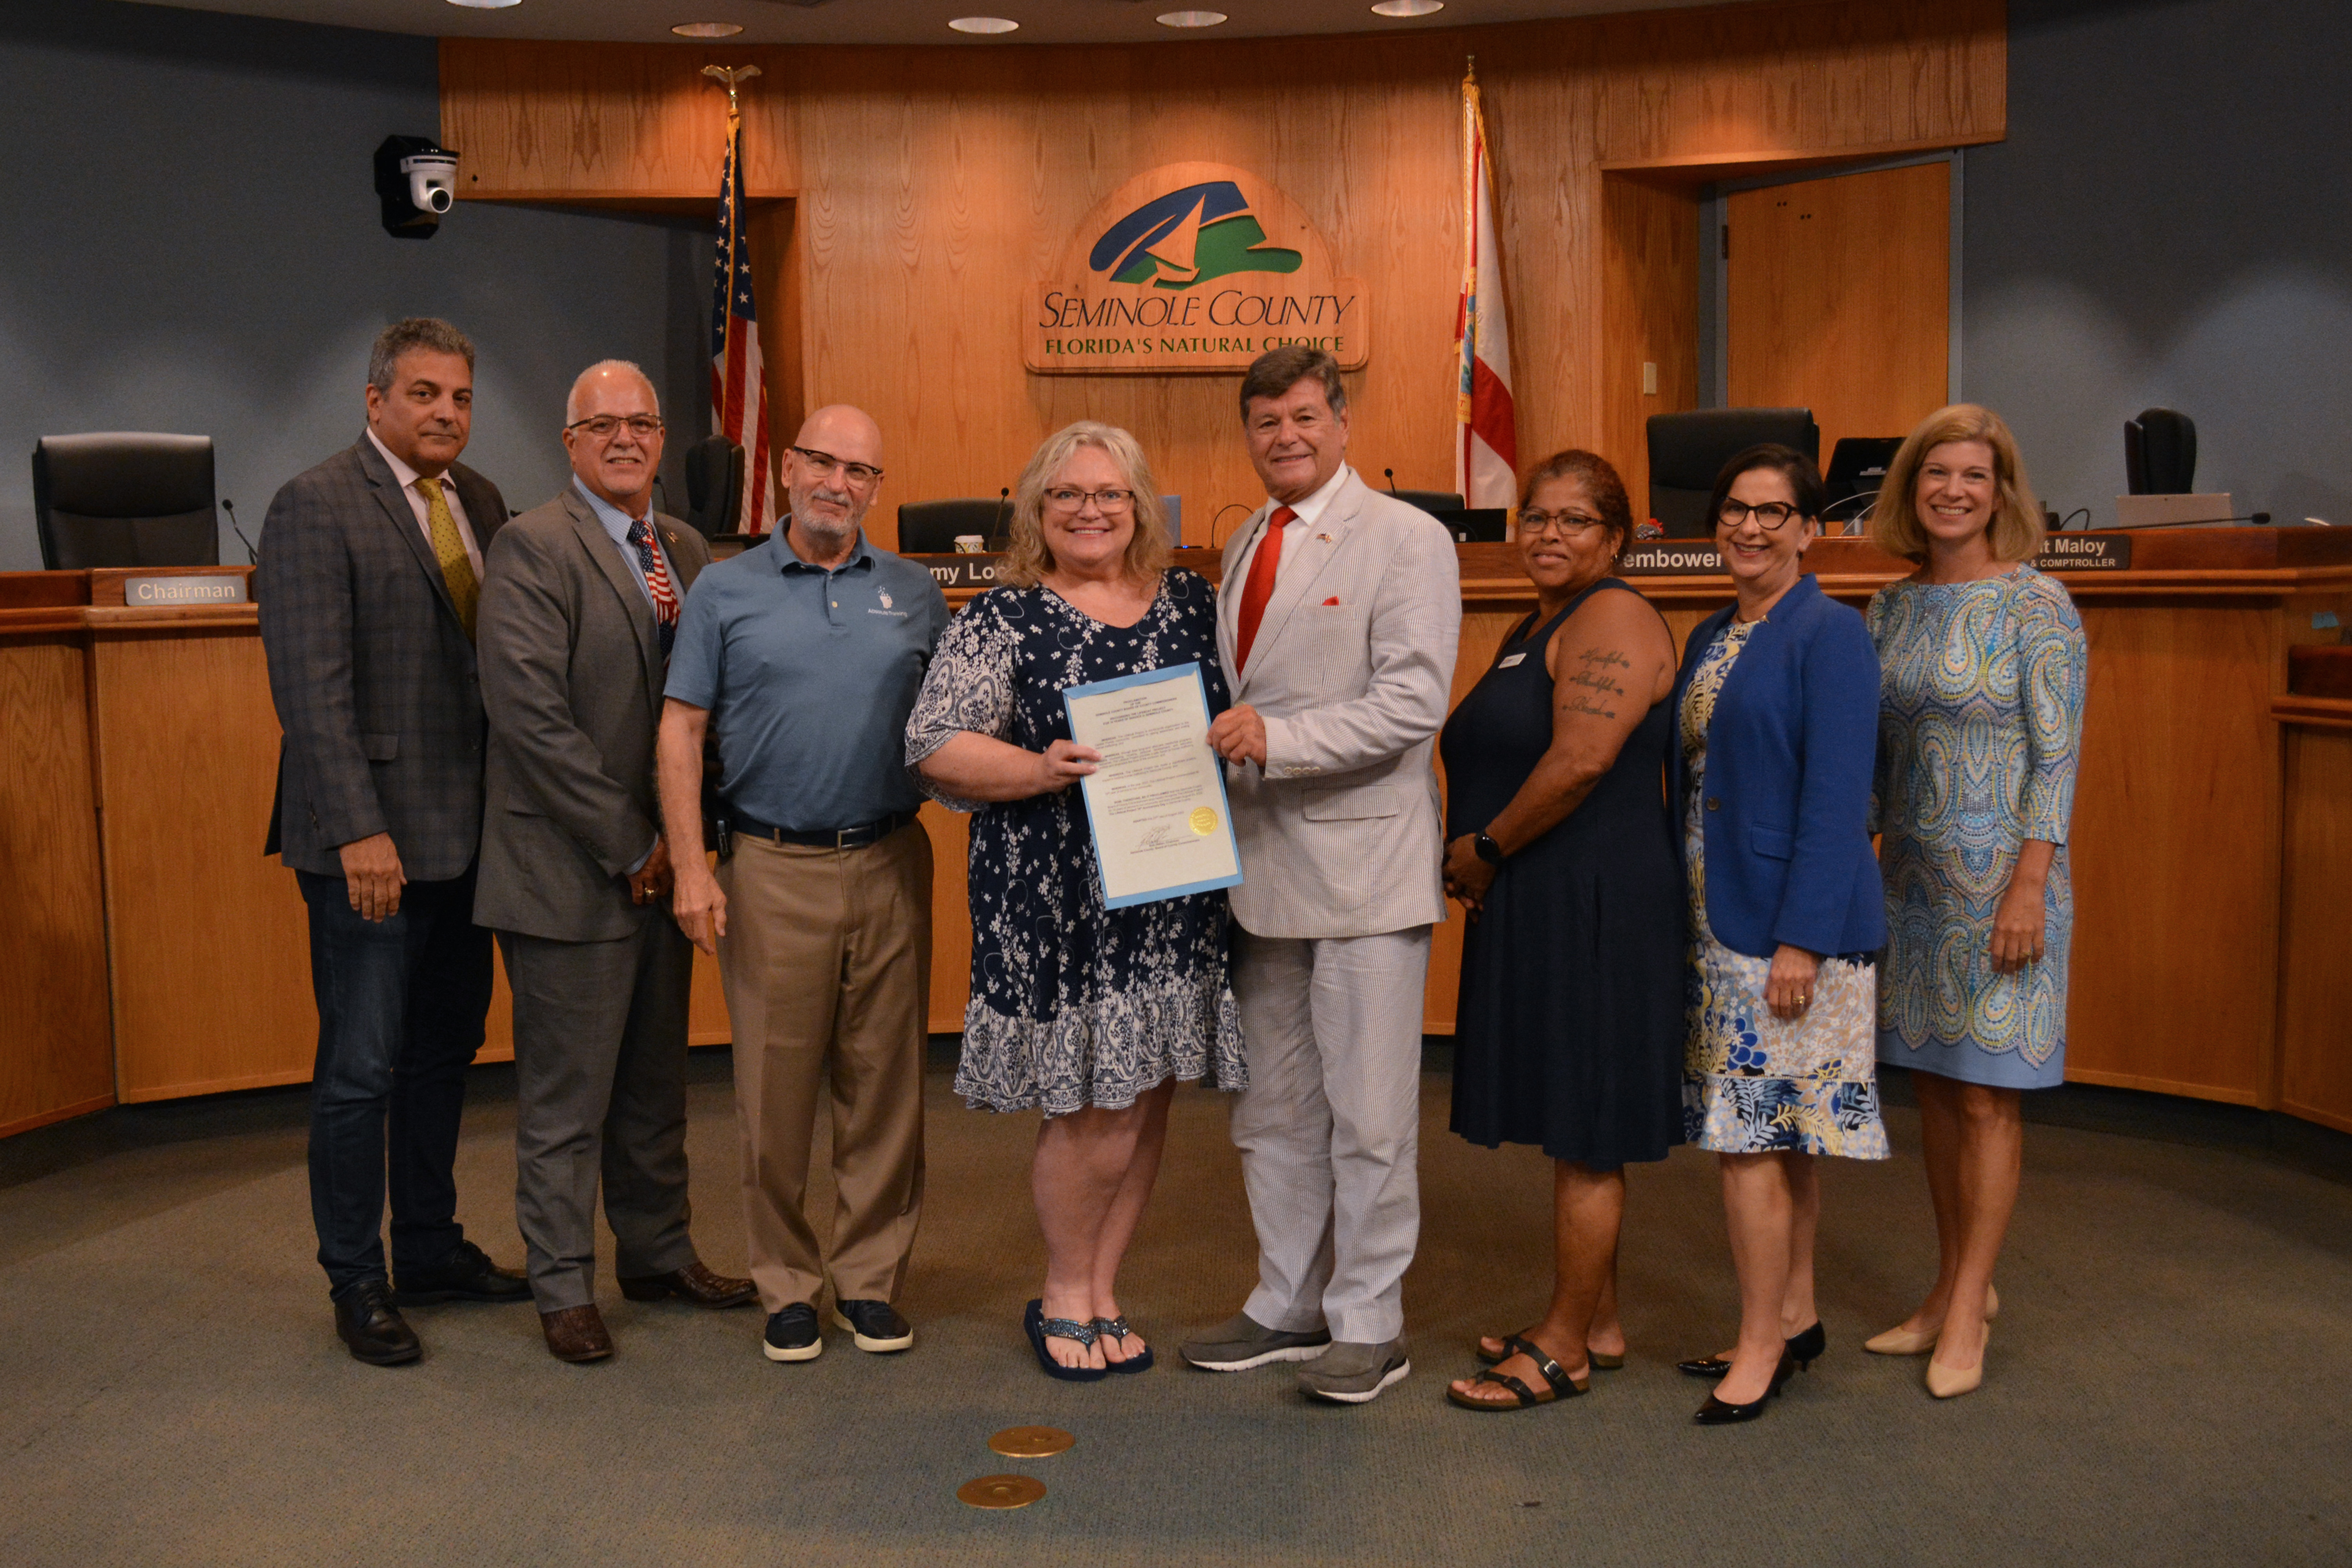 Proclamation – Recognizing The Lifeboat Project for 10 Years of Service in Seminole County (Jill Bolander Cohen, Founder/CEO) 